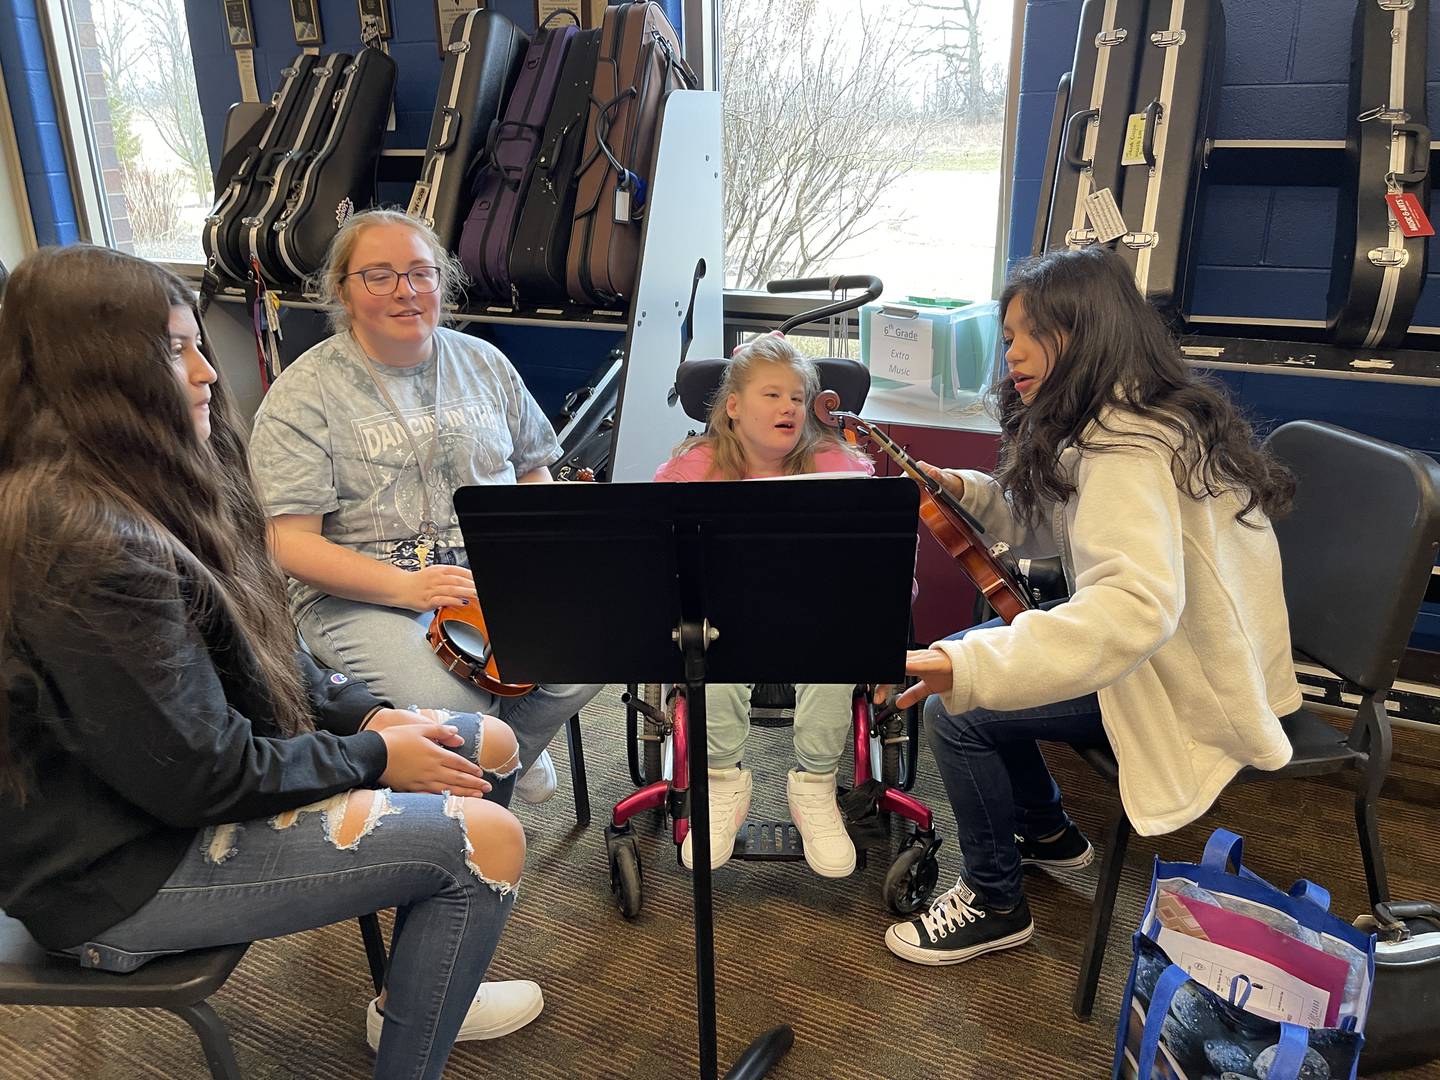 From left to right, Laila Arias, classroom associate Gretchen Butenschoen, Olivia Hagen and Yaxiri Juarez-Ramos practice music on Friday, Jan. 13, 2023, at Creekside Middle School, as part of the United Sound program. United Sound is geared toward removing social barriers through music. At Creekside, it provides students in special education the opportunity to learn how to play while receiving social interaction.